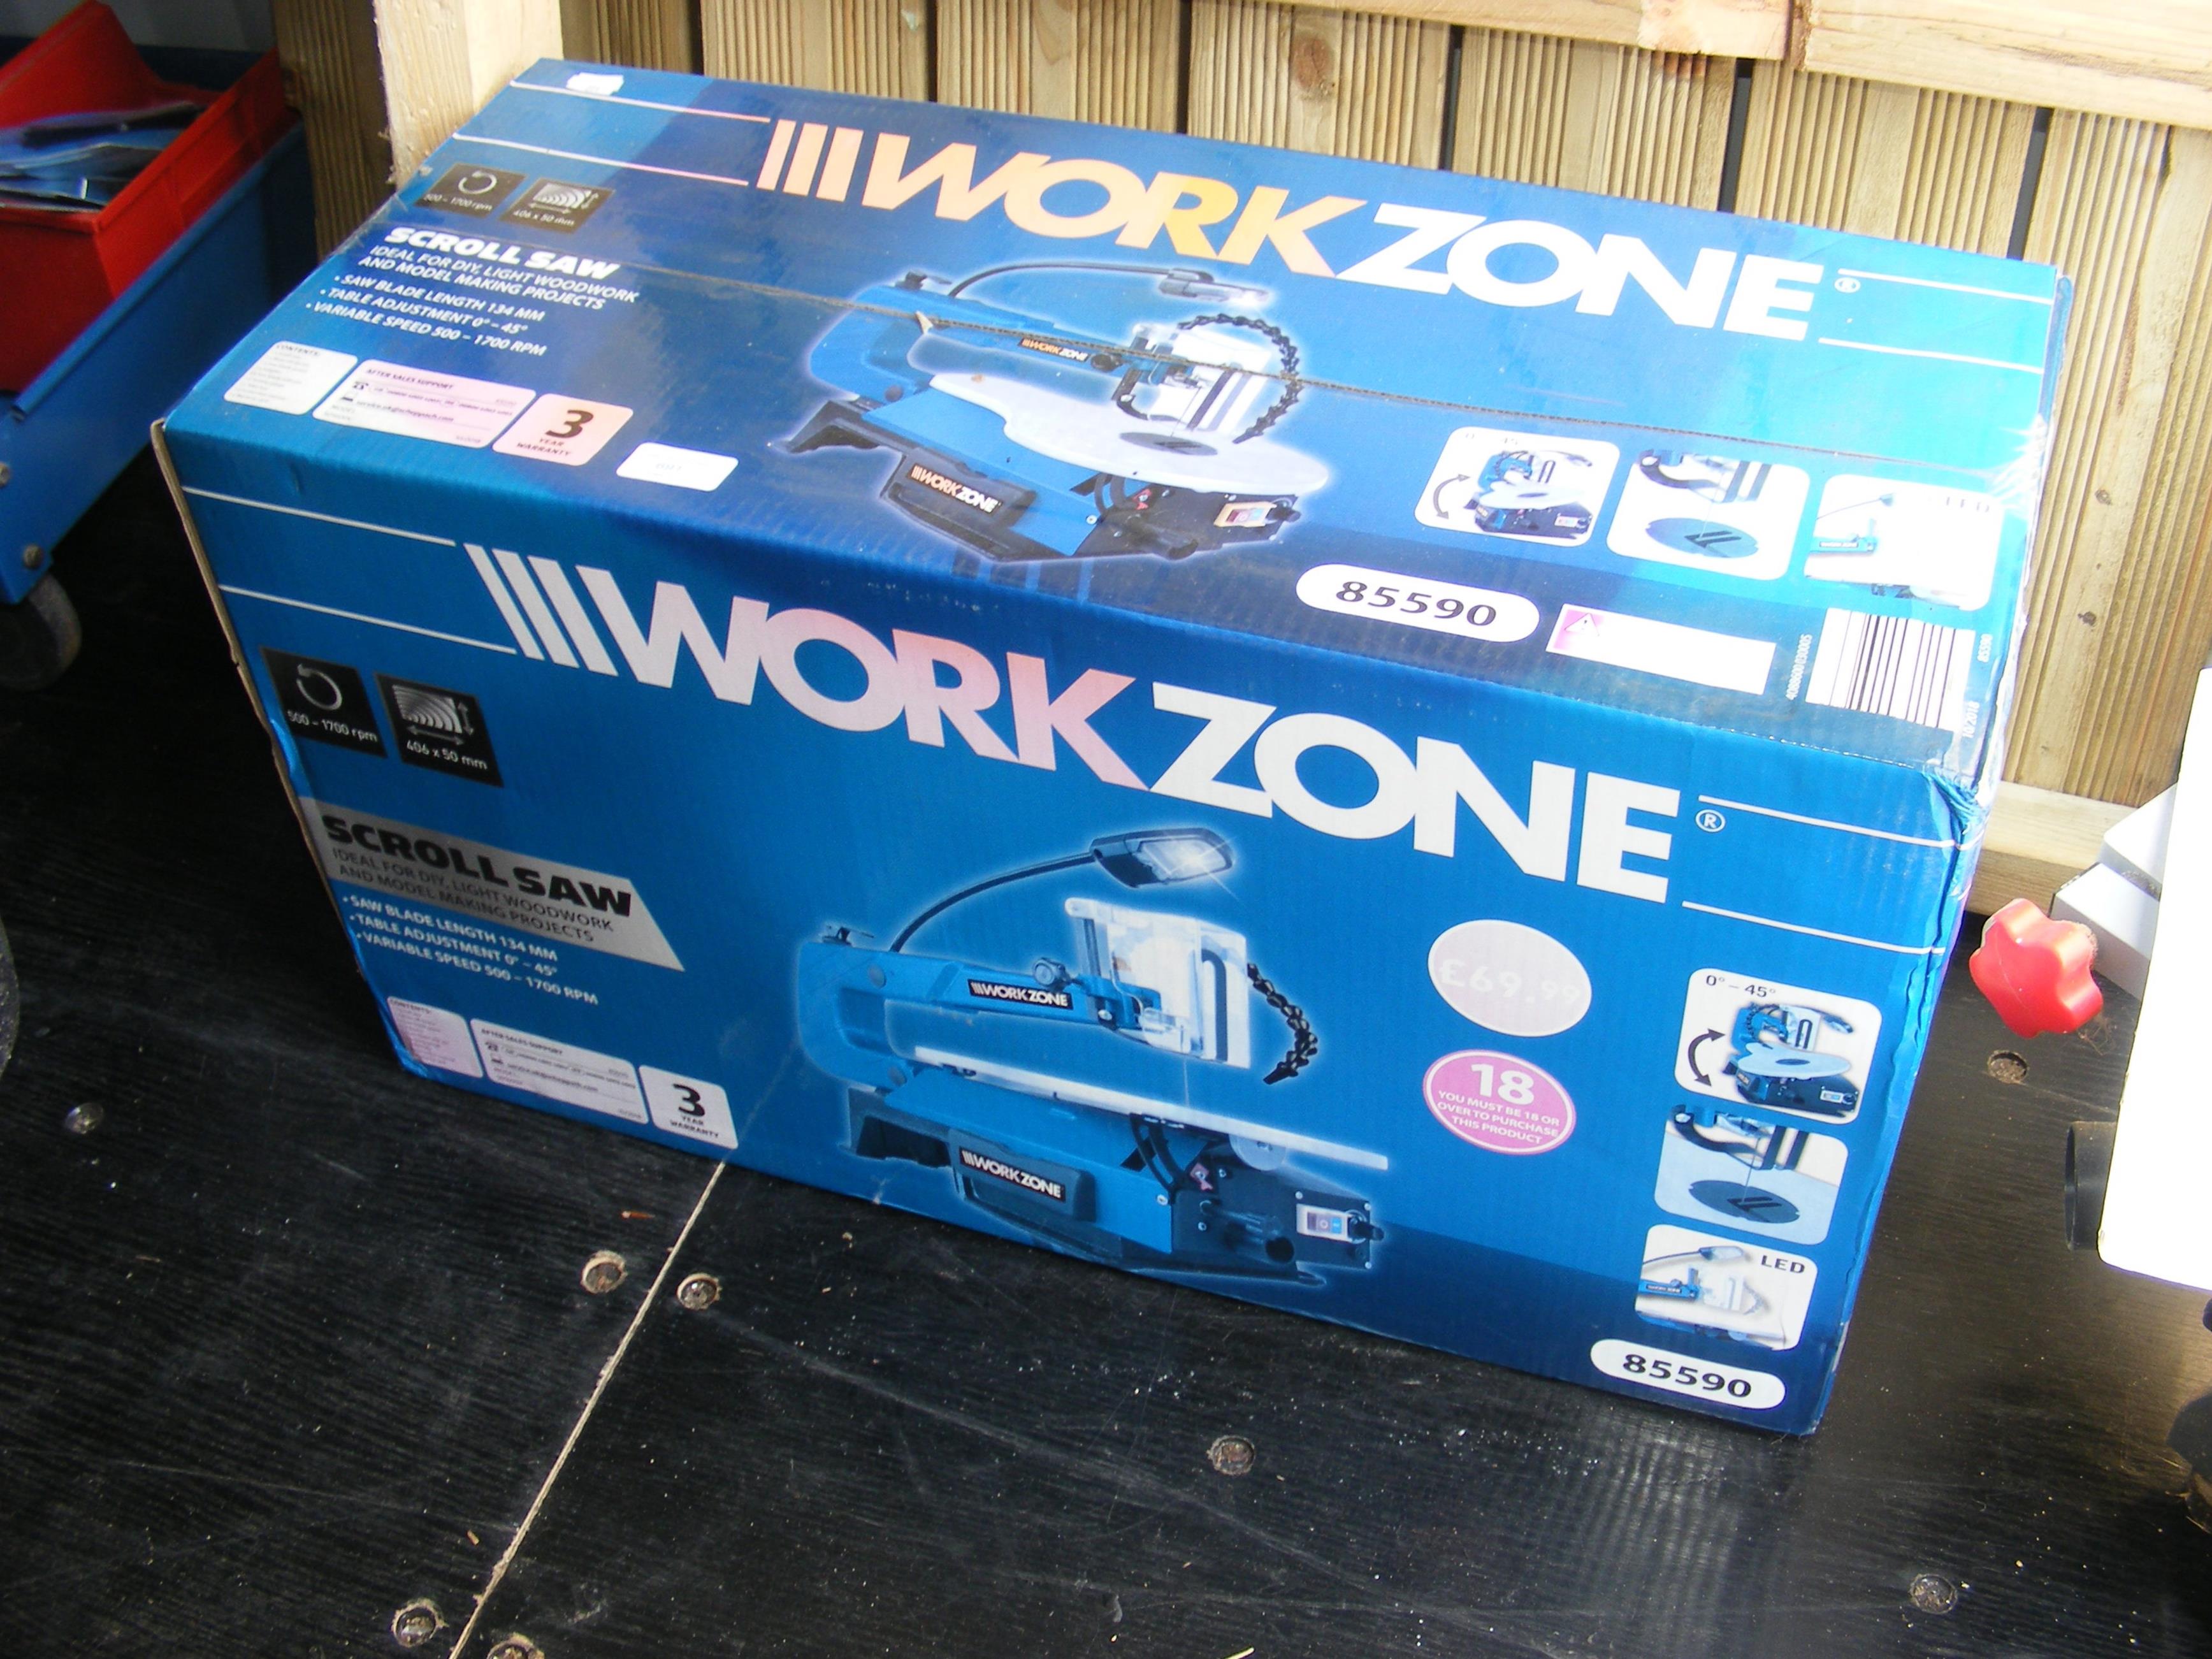 An un-opened Workzone scroll saw